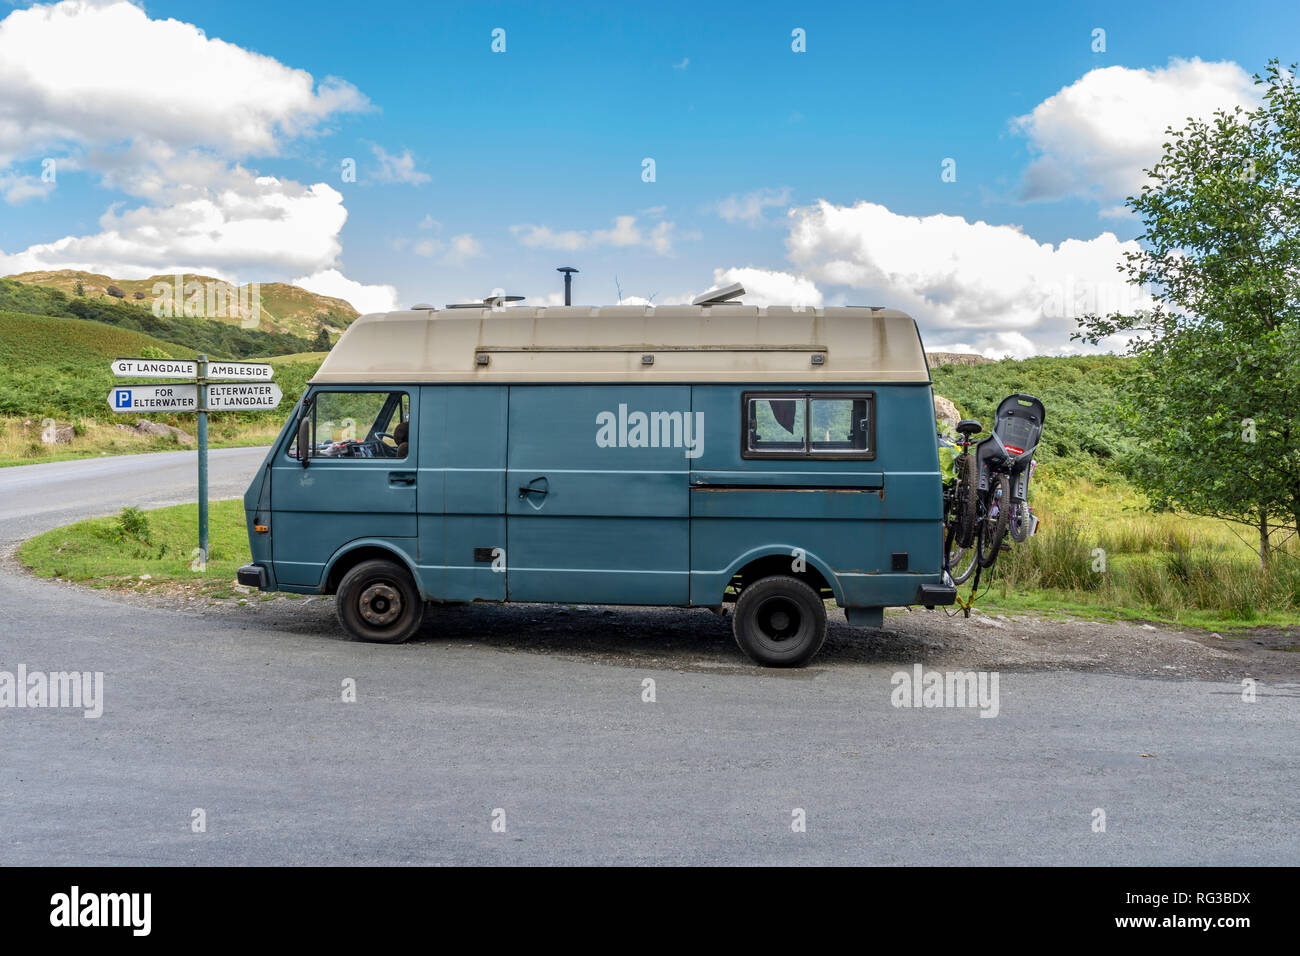 Mobile home  camper van parked in the  Lake District North West England UK Elterwater with fingerpost directions to Langdale Valley and Ambleide  with Stock Photo